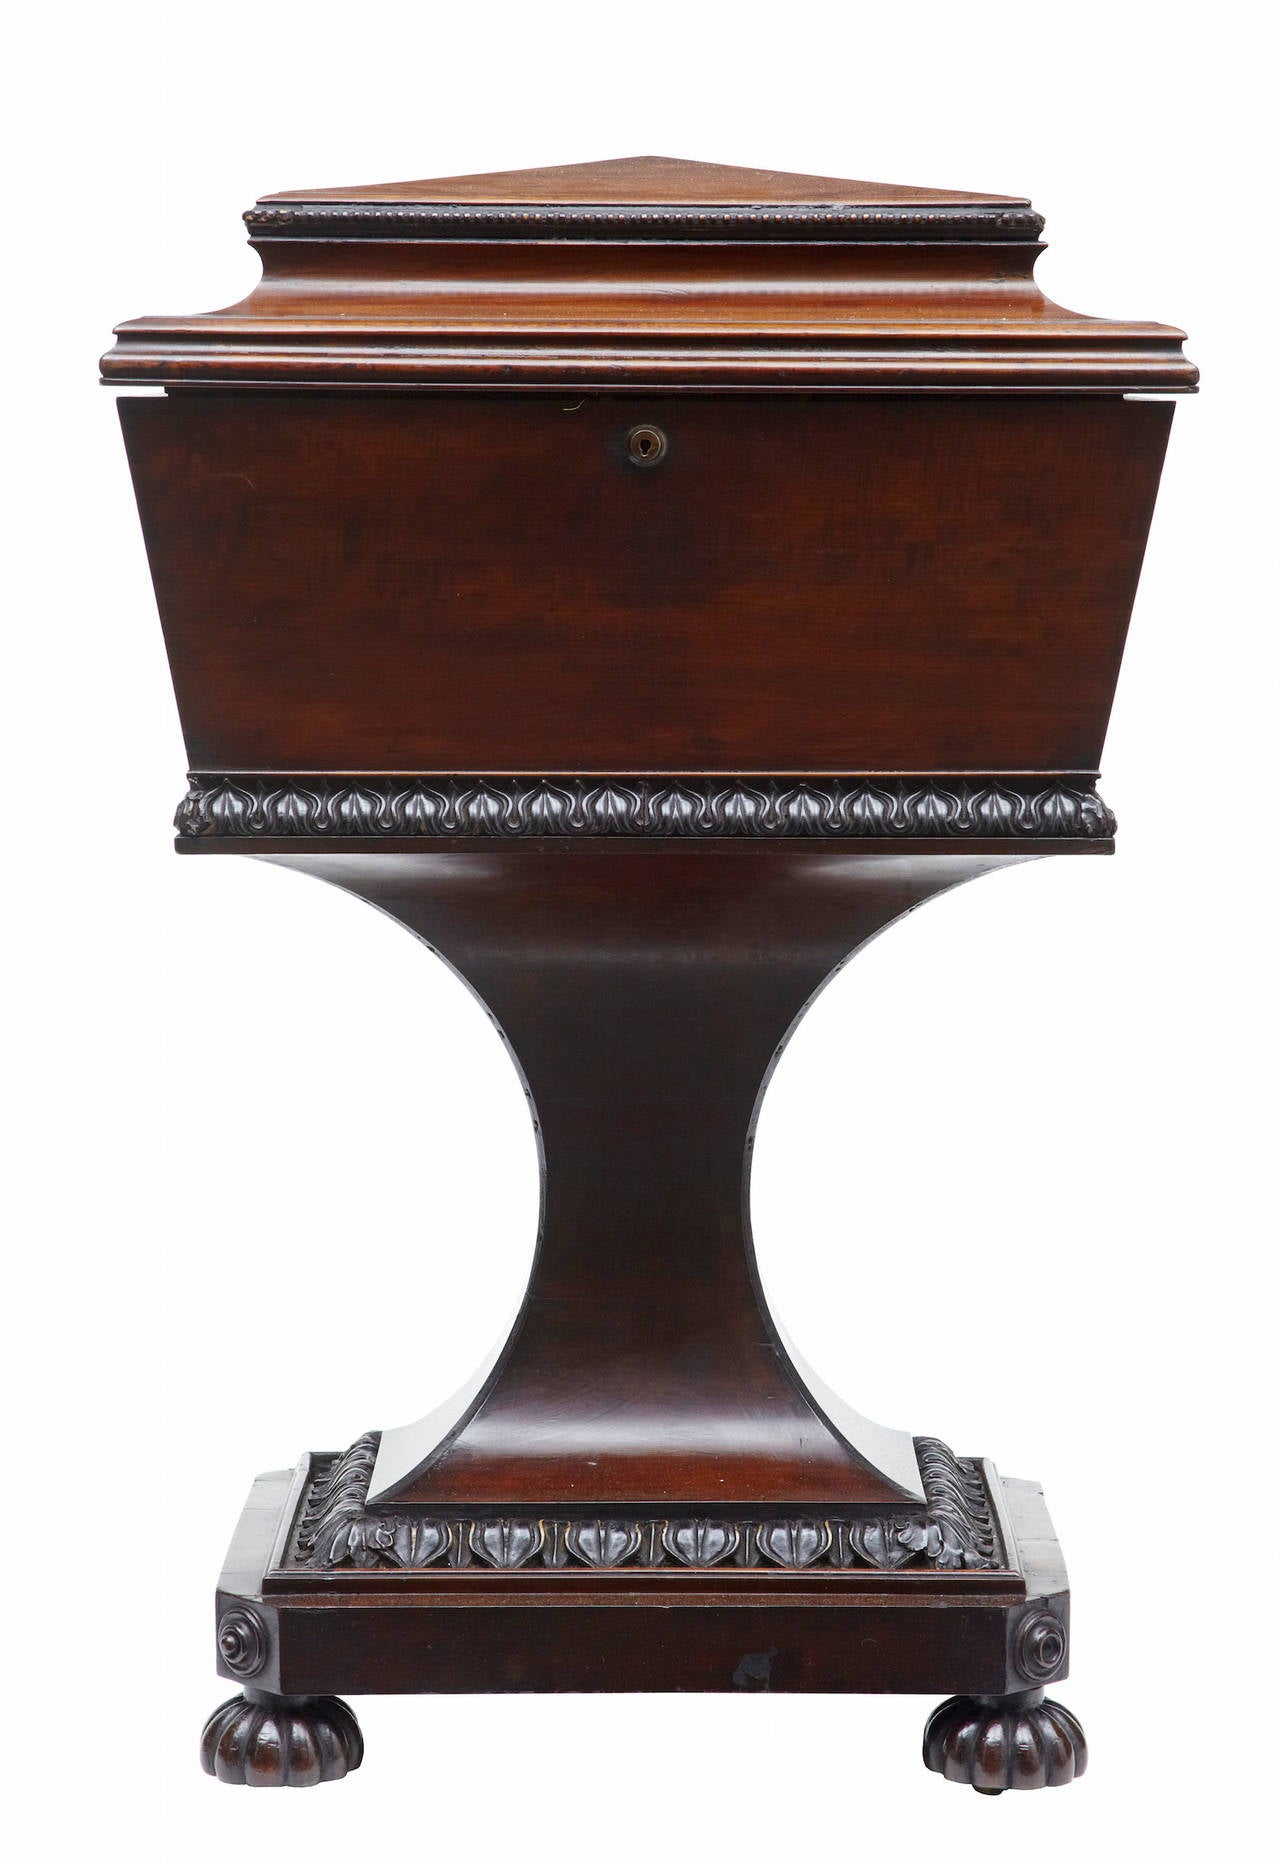 19th century carved mahogany teapoy stamped Gillows

Superb quality Gillows regency mahogany teapoy, circa 1820.

The main body being of sarcophagus form, which opens to four mahogany slides on each corner, one large tole compartment flanked